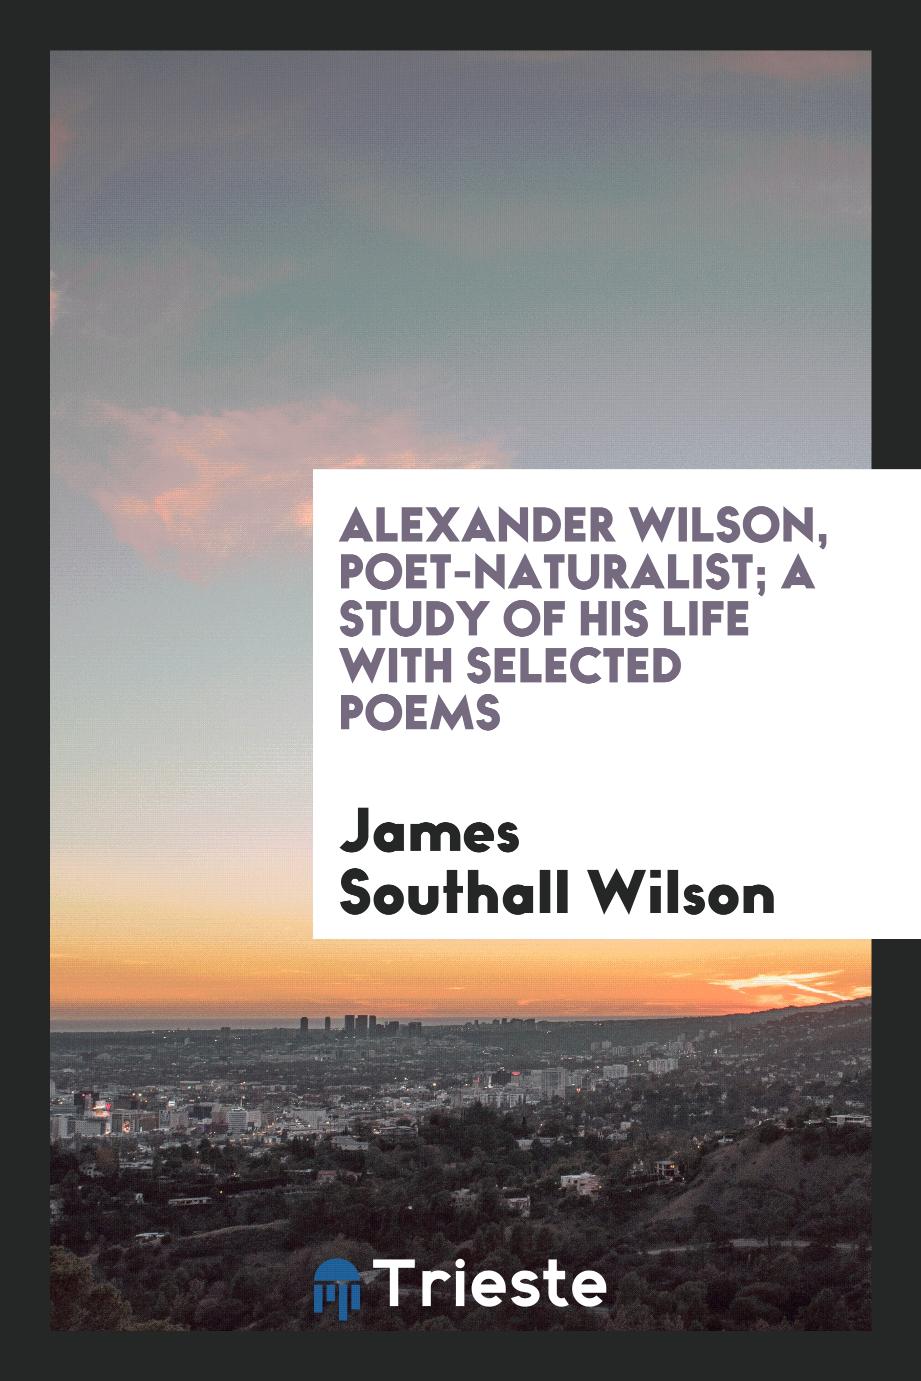 Alexander Wilson, poet-naturalist; a study of his life with selected poems